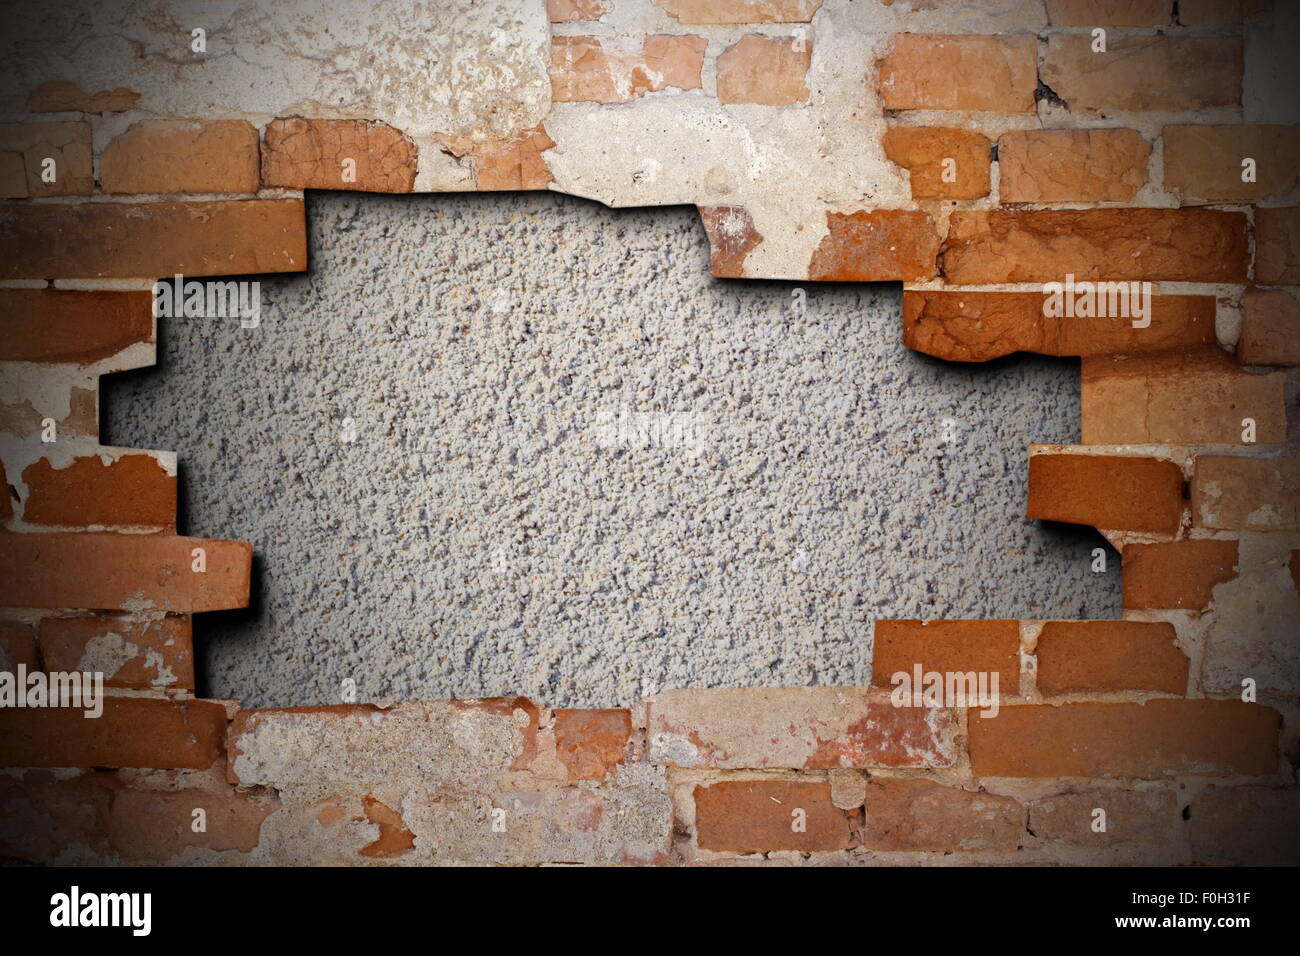 mortar texture in a cracked brick wall Stock Photo